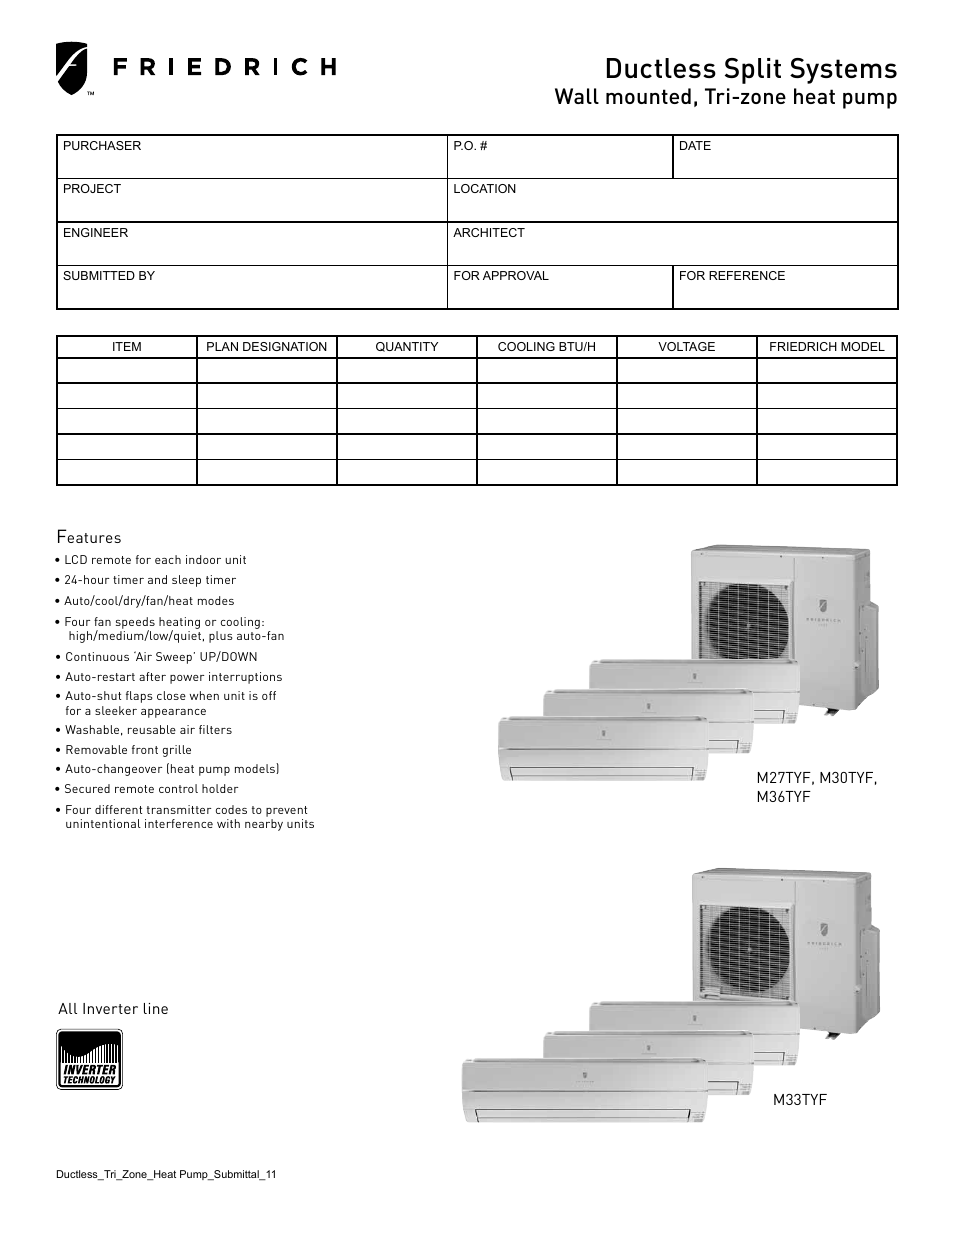 DUCTLESS SPLIT SYSTEMS M30TYF